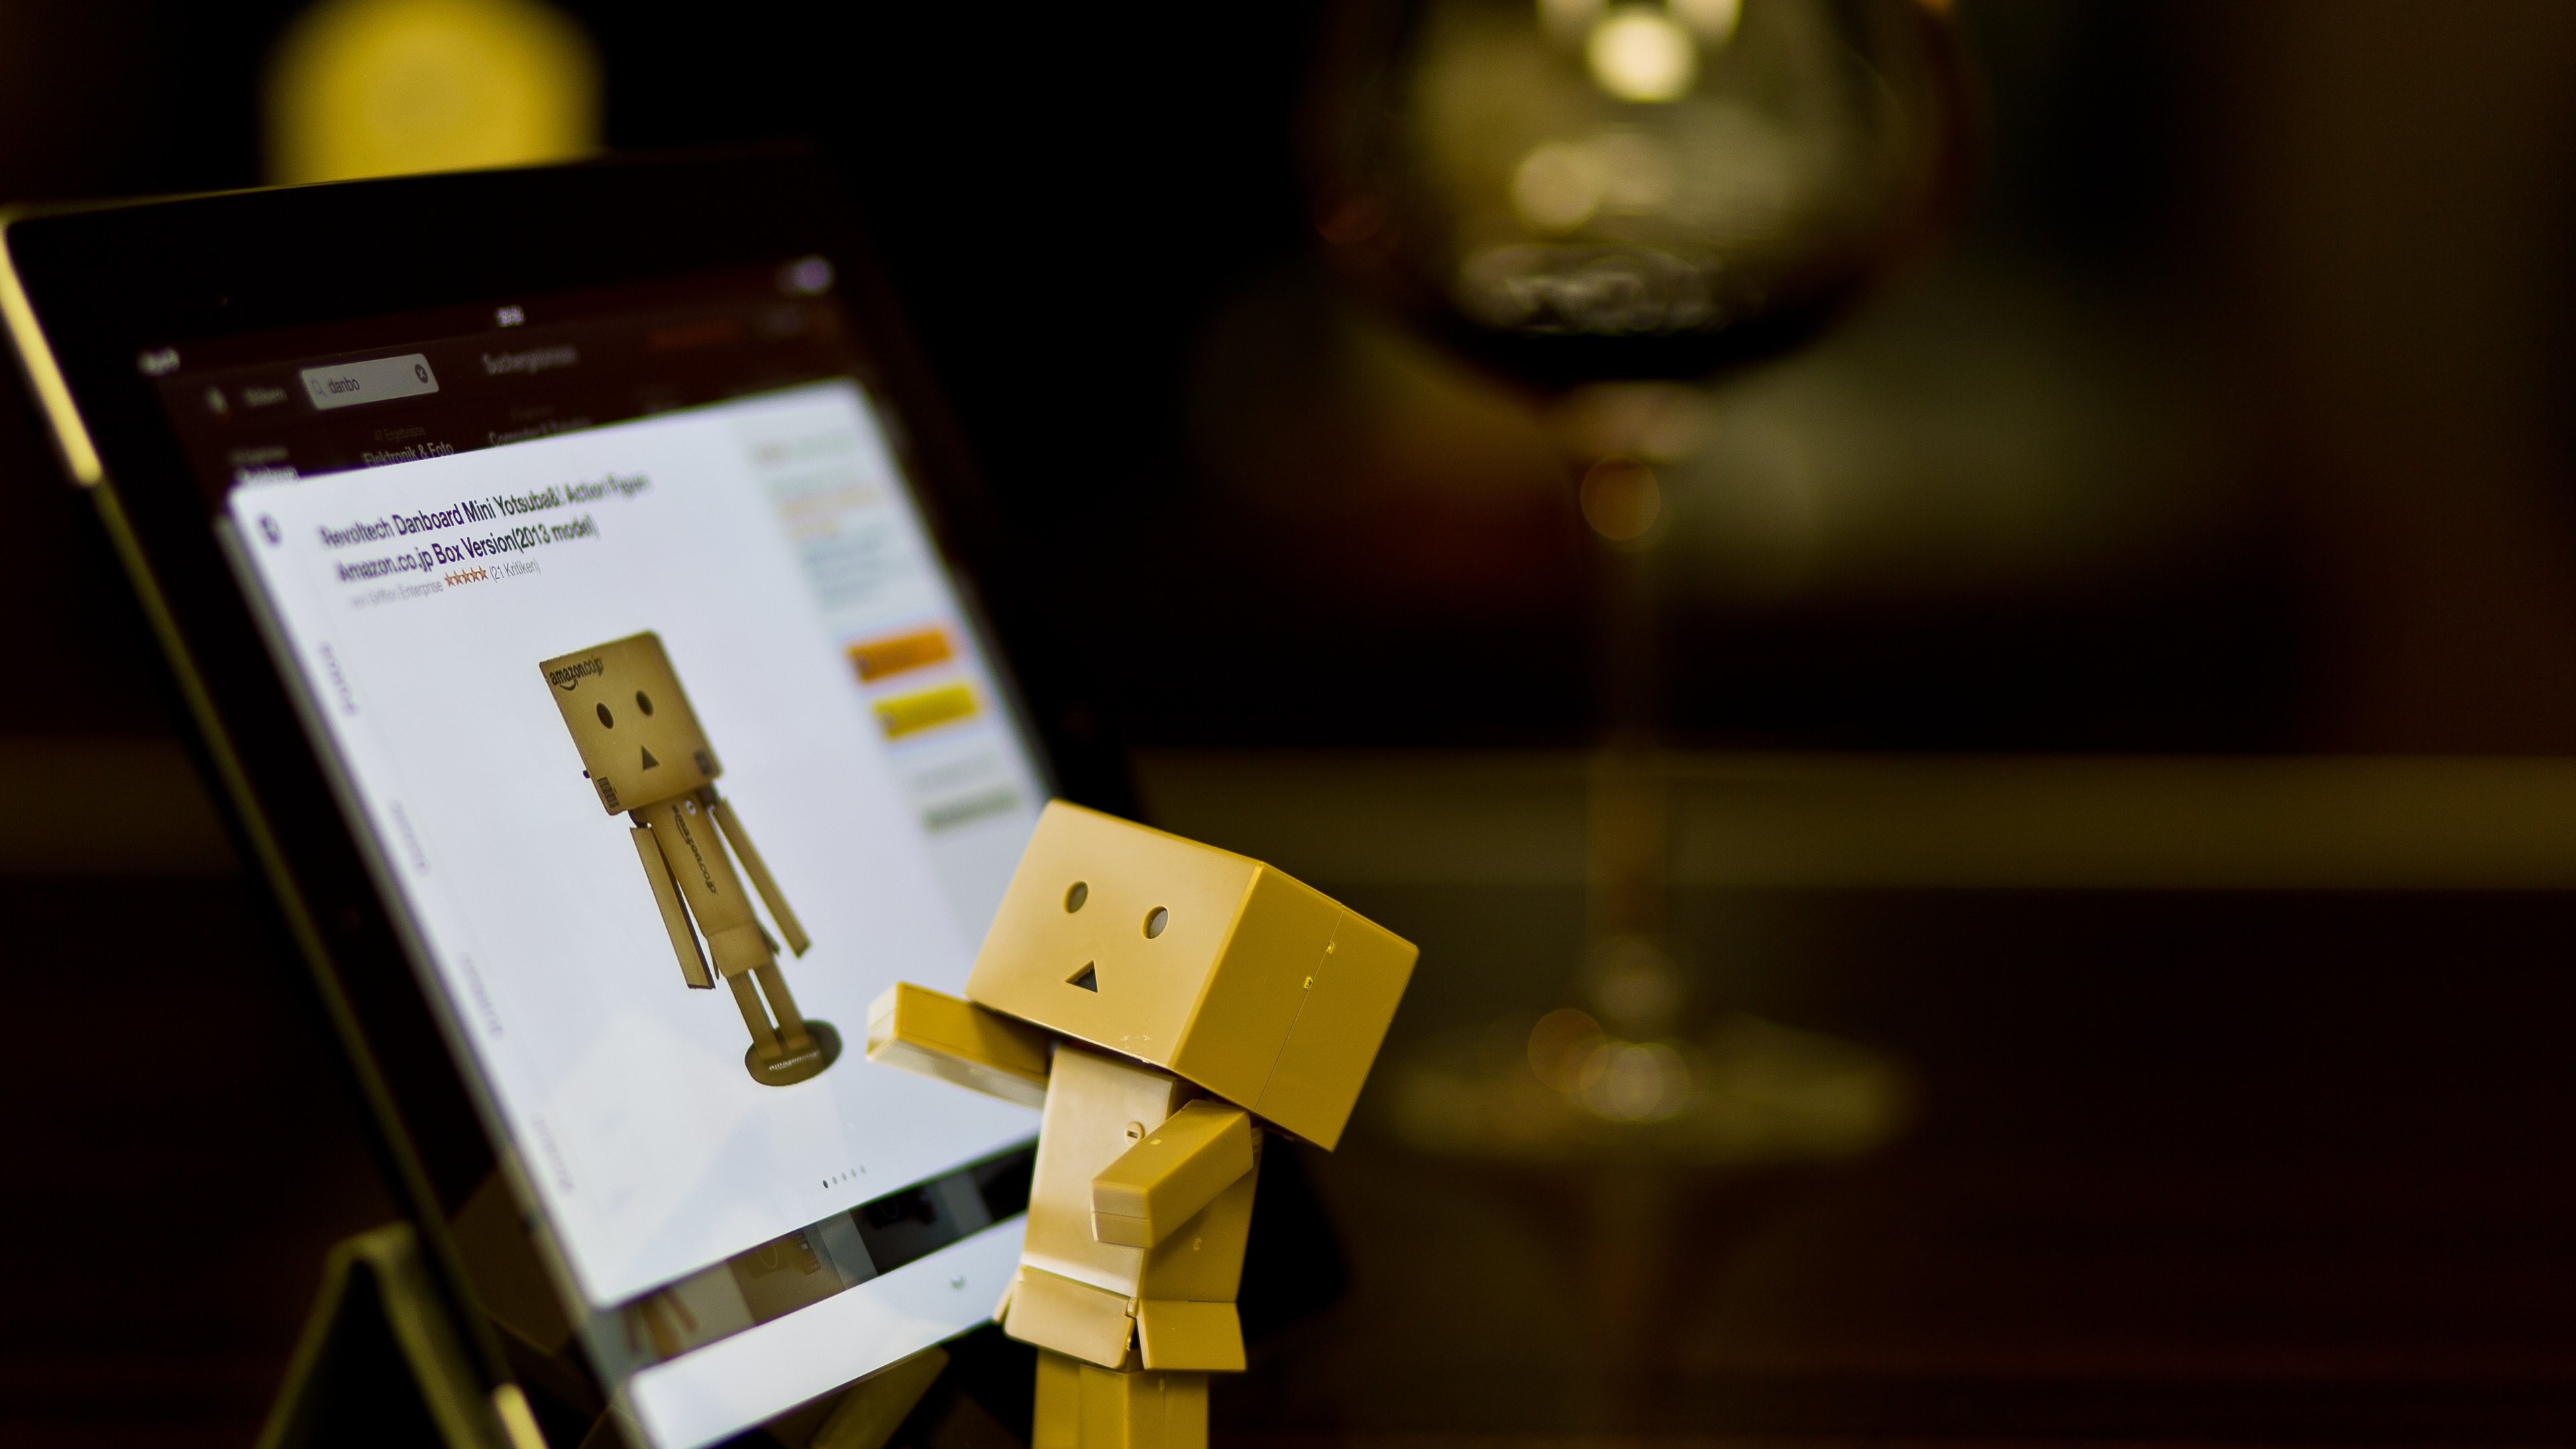 Danbo Amazon, Cute 4K wallpapers, Quirky character, Playful imagery, 3840x2160 4K Desktop